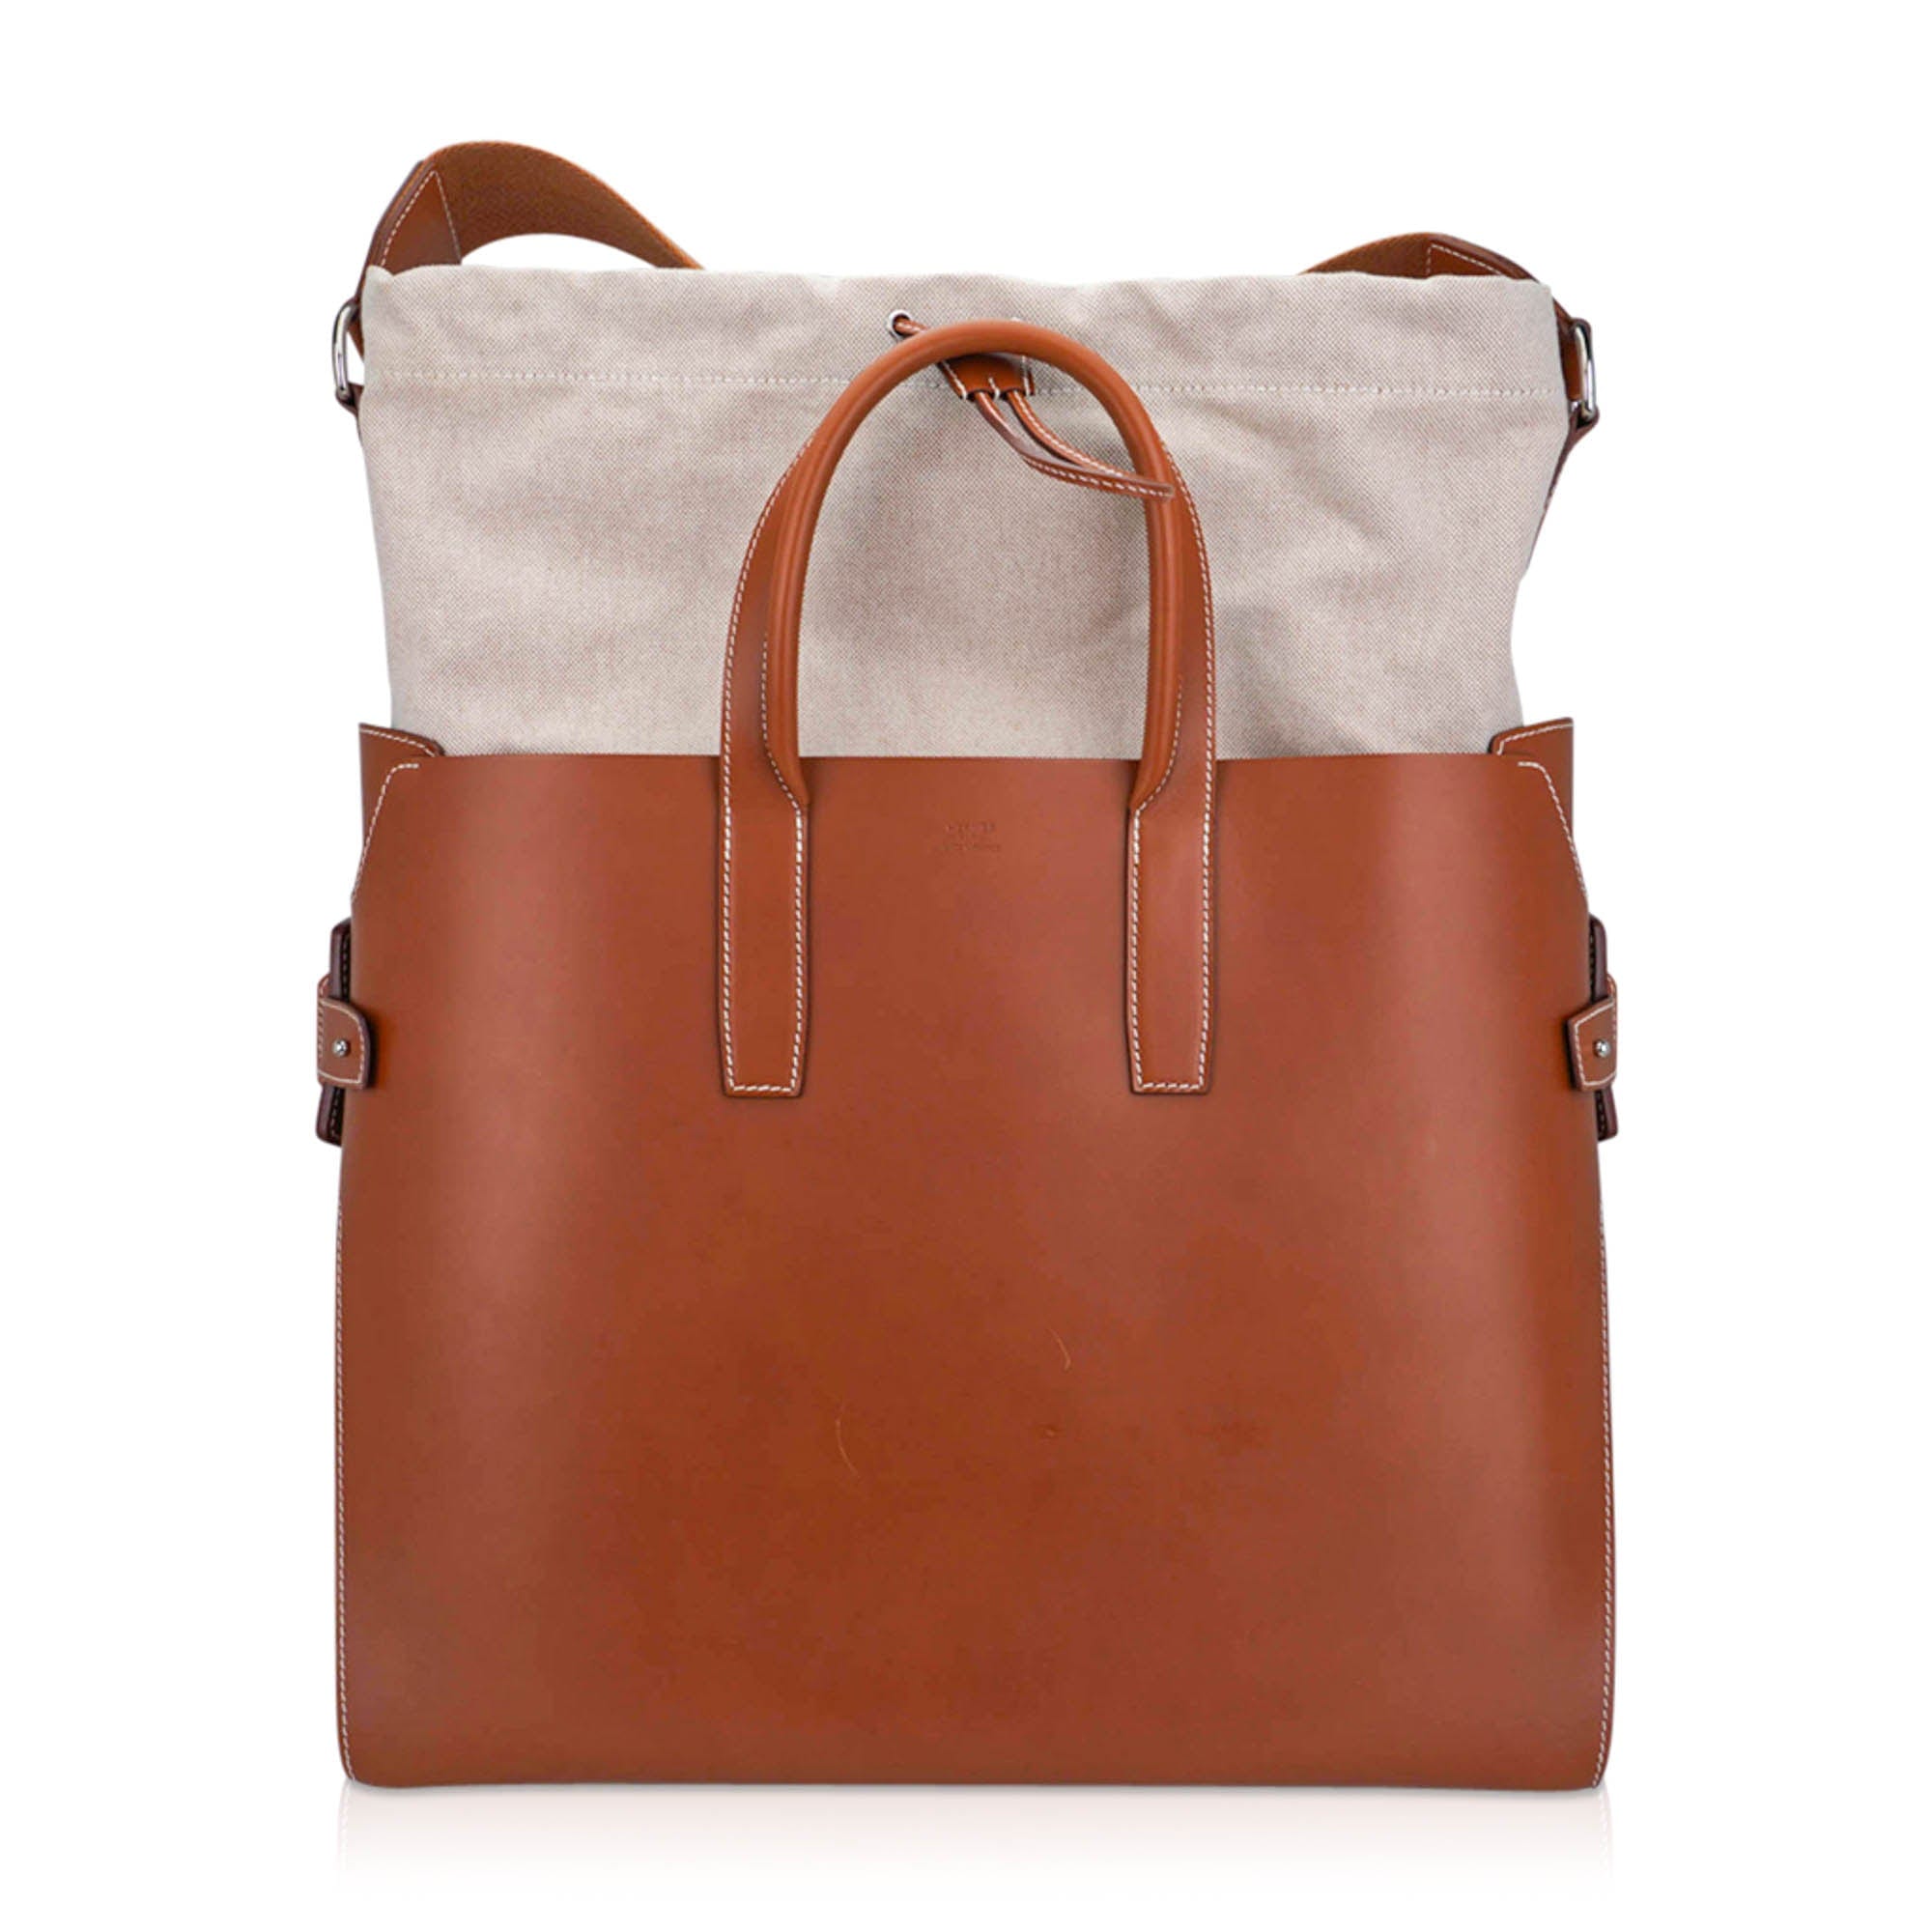 Hermes Limited Edition Tote Bag Fauve Leather Removeable Toile with Palladium Hardware